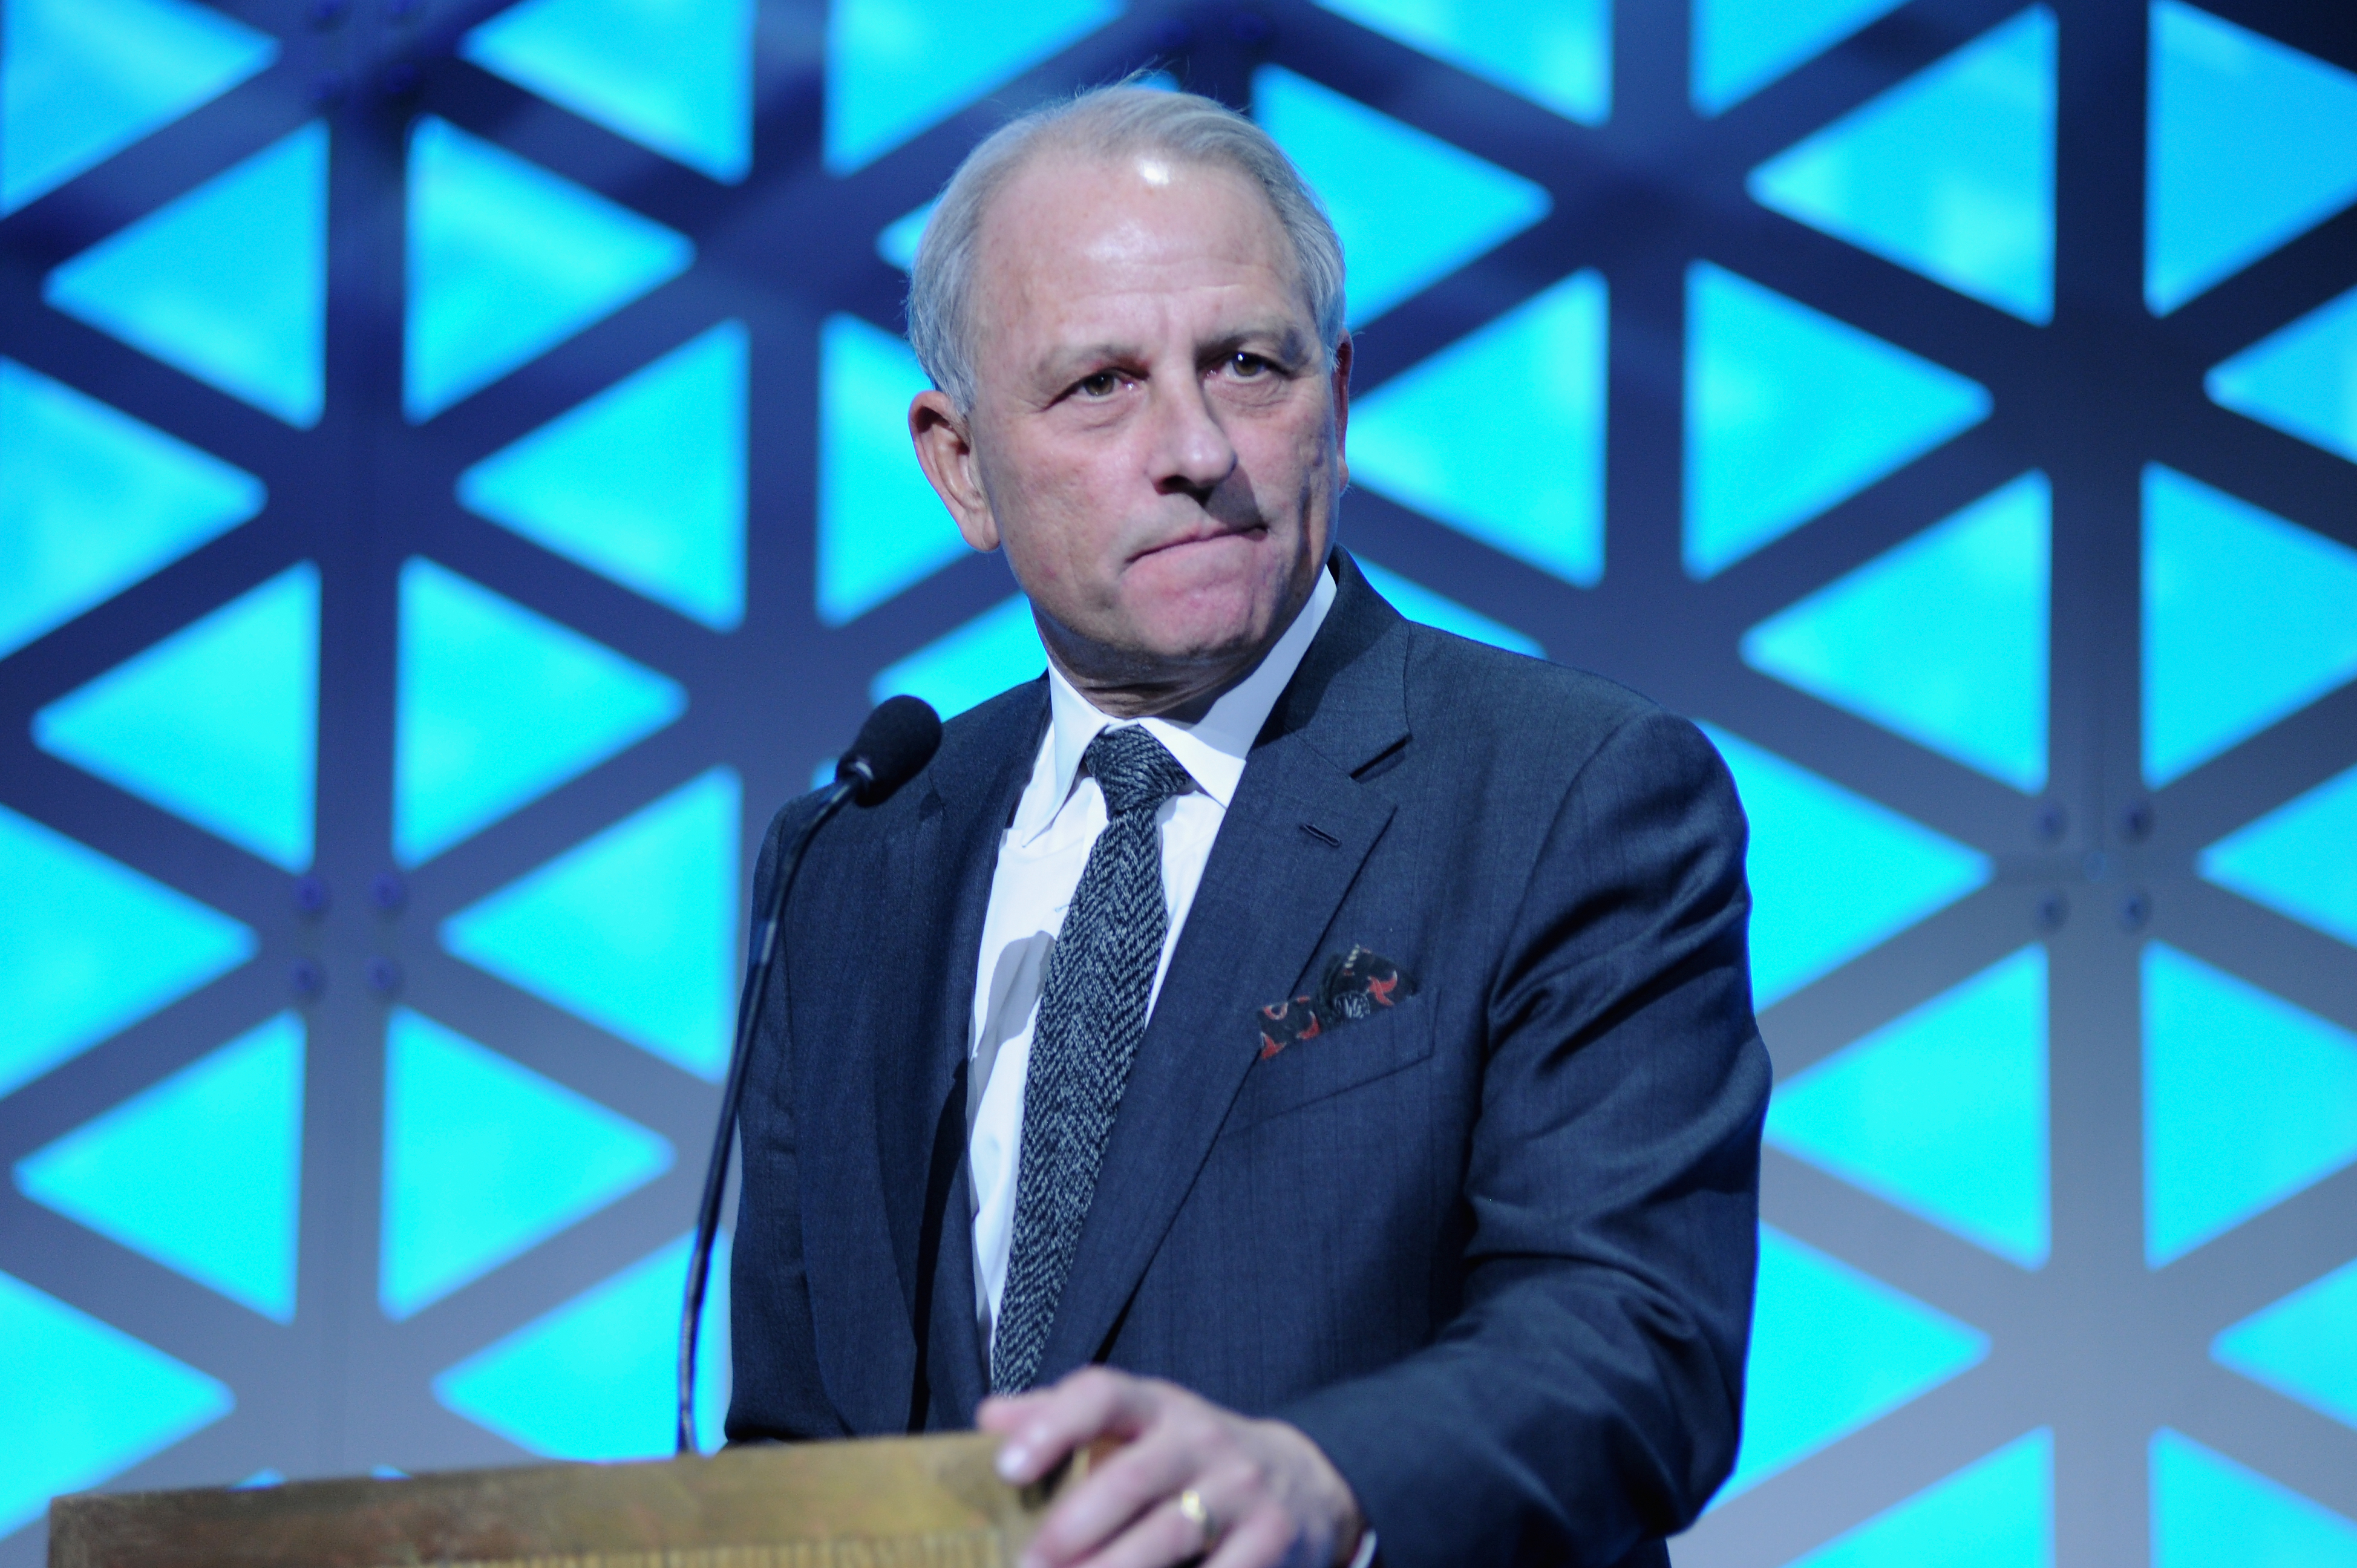 60 Minutes Executive Producer Jeff Fager accepts the Institutional Award on stage during The 77th Annual Peabody Awards Ceremony at Cipriani Wall Street on May 19, 2018 in New York City. (Photo by Brad Barket/Getty Images for Peabody) (Brad Barket—Getty Images for Peabody)